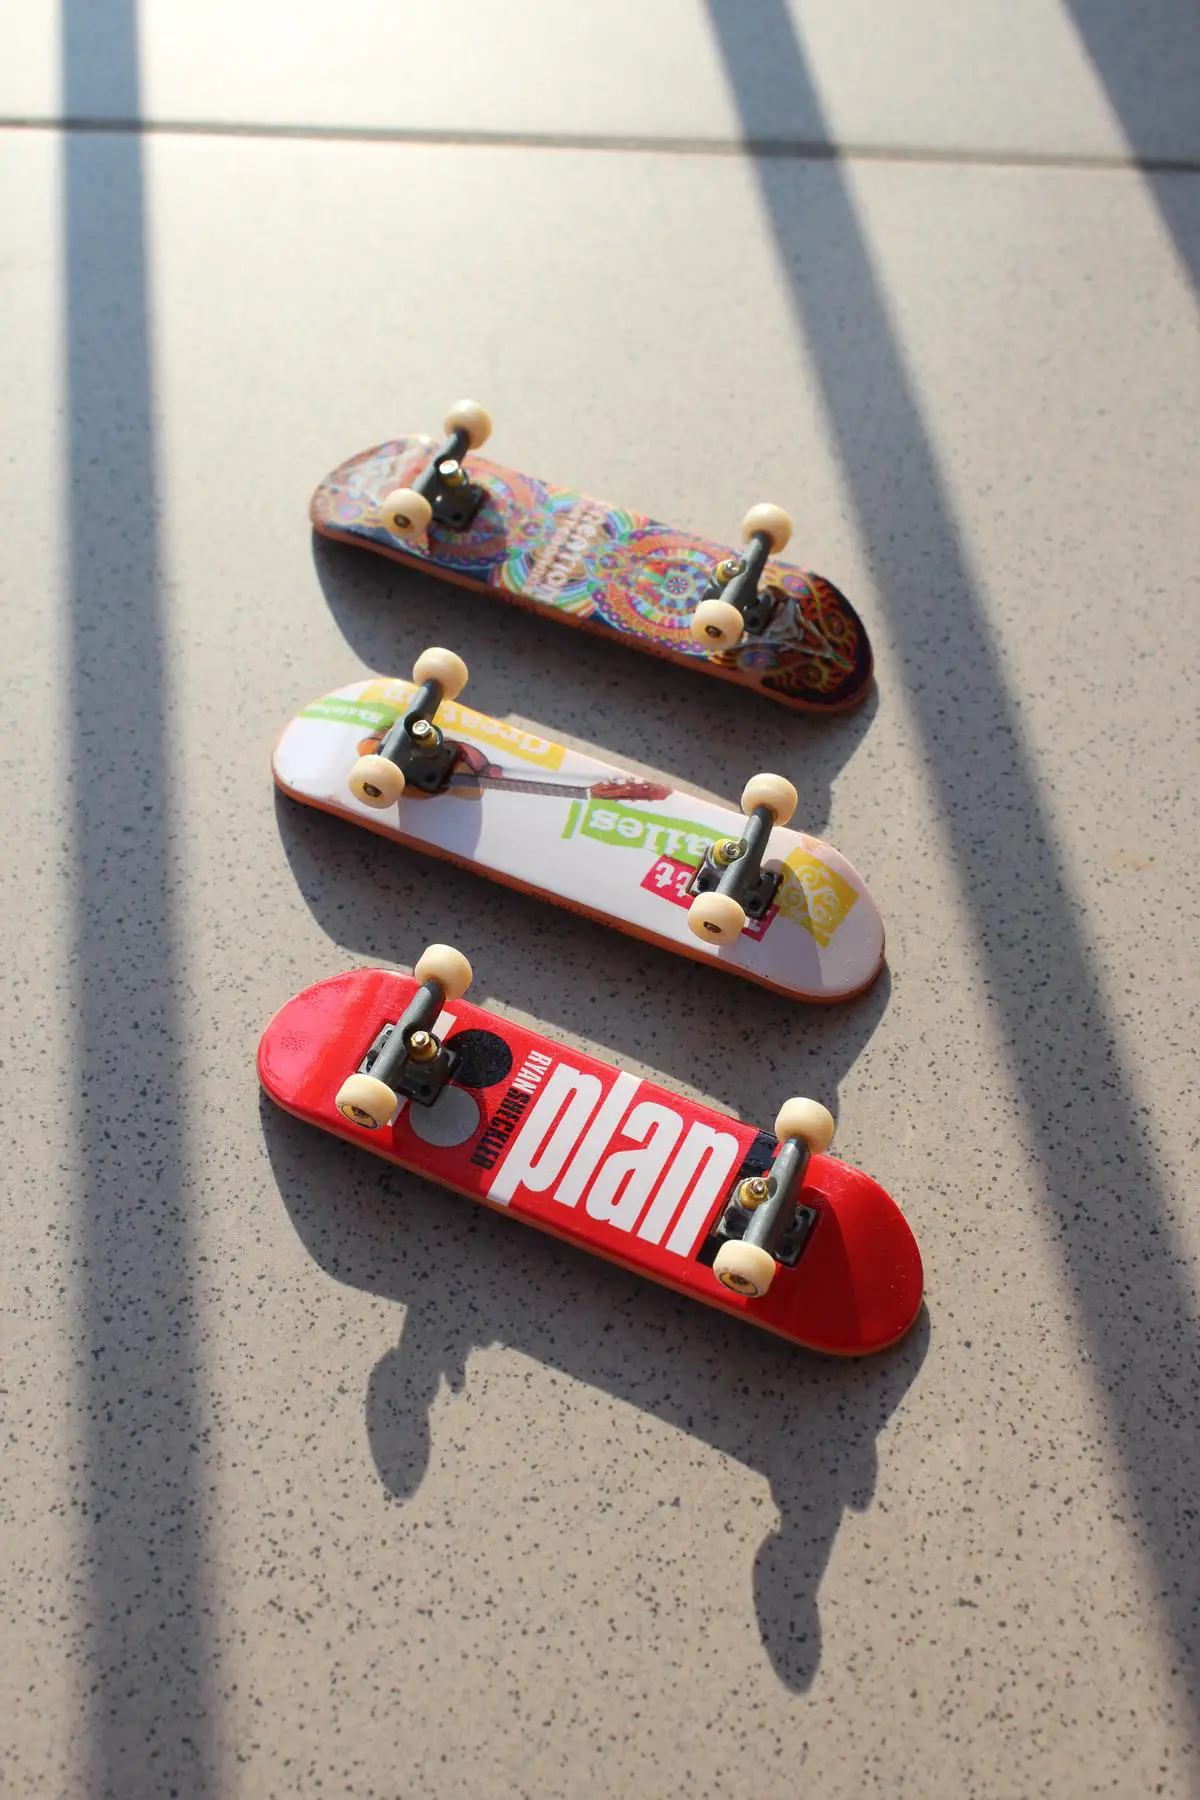 Image showcasing the top all-terrain electric skateboards